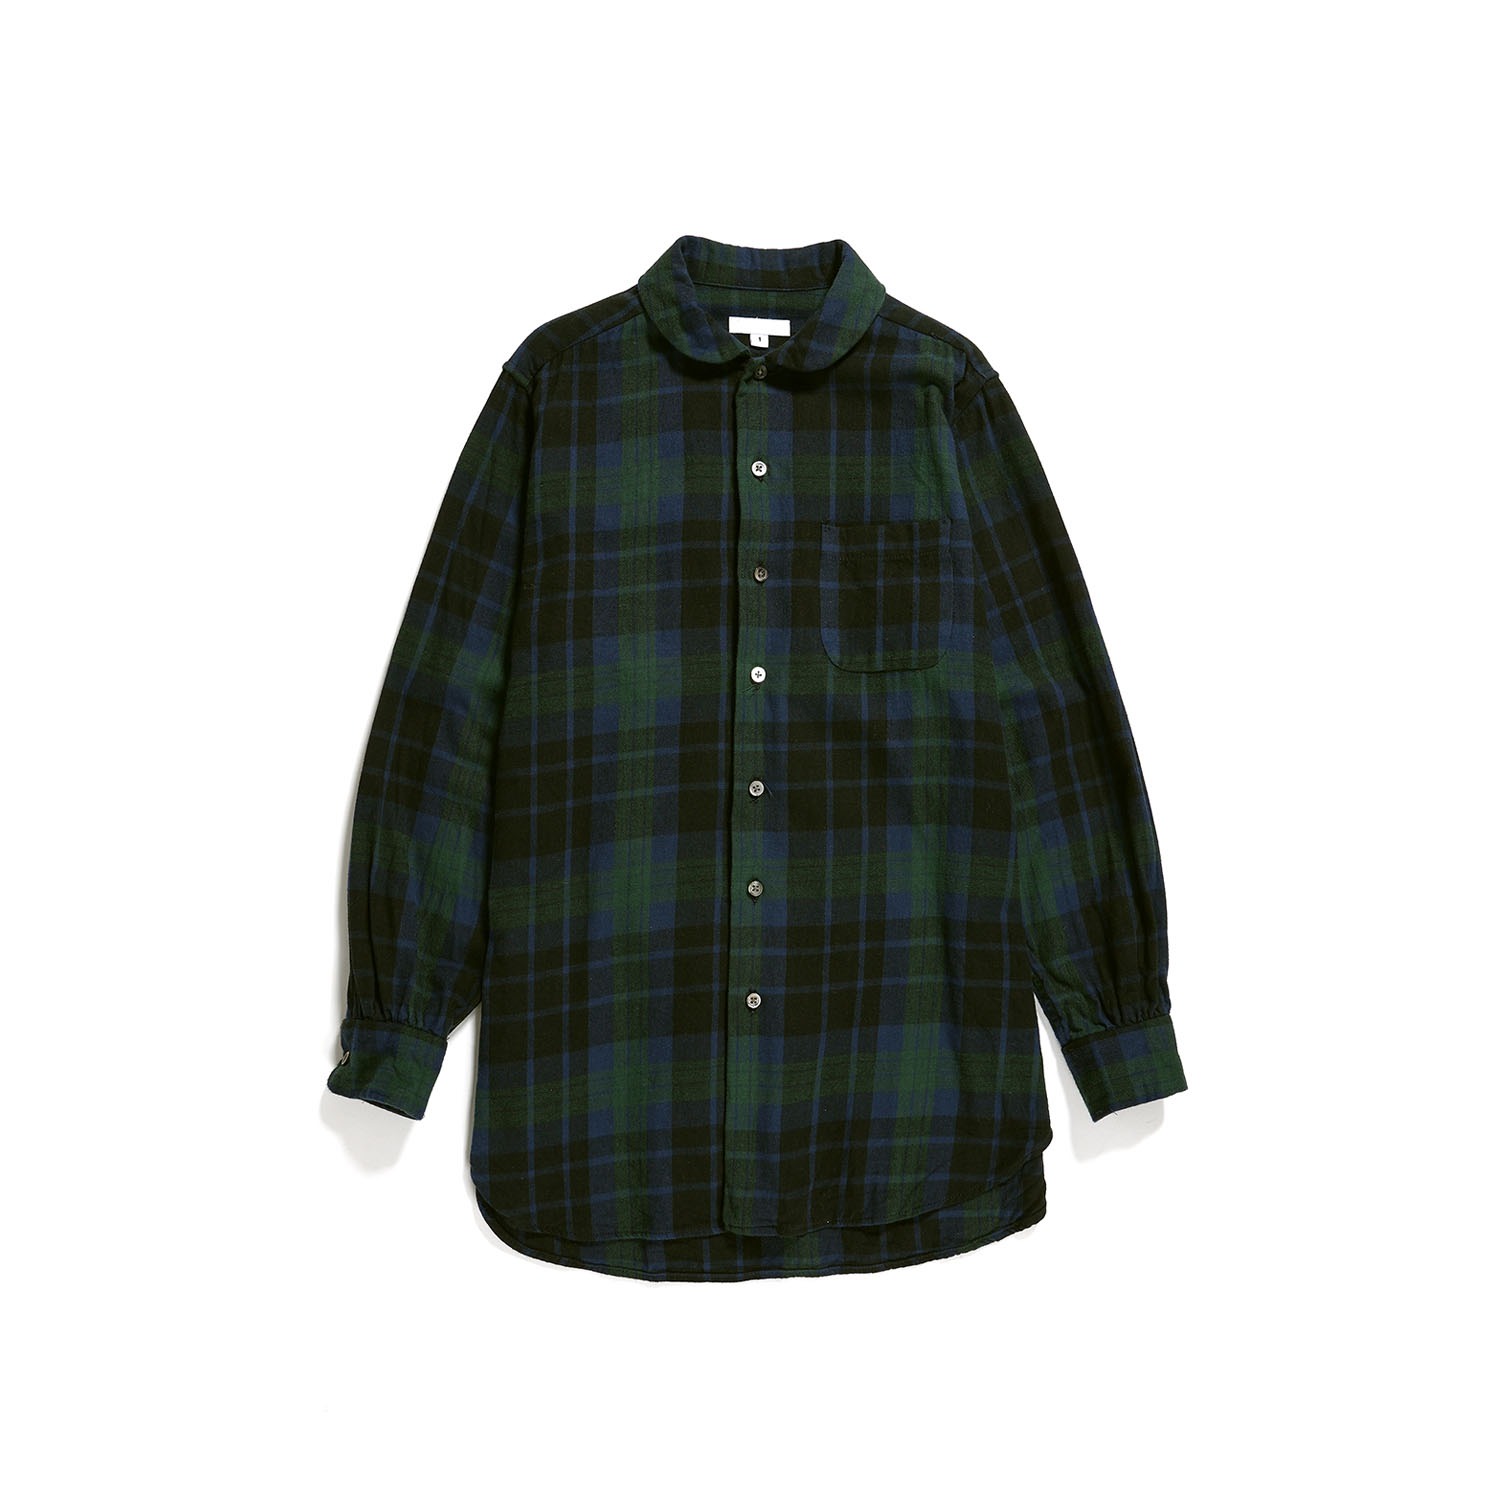 ﻿Rounded Collar Shirt - Black Watch (-30%)